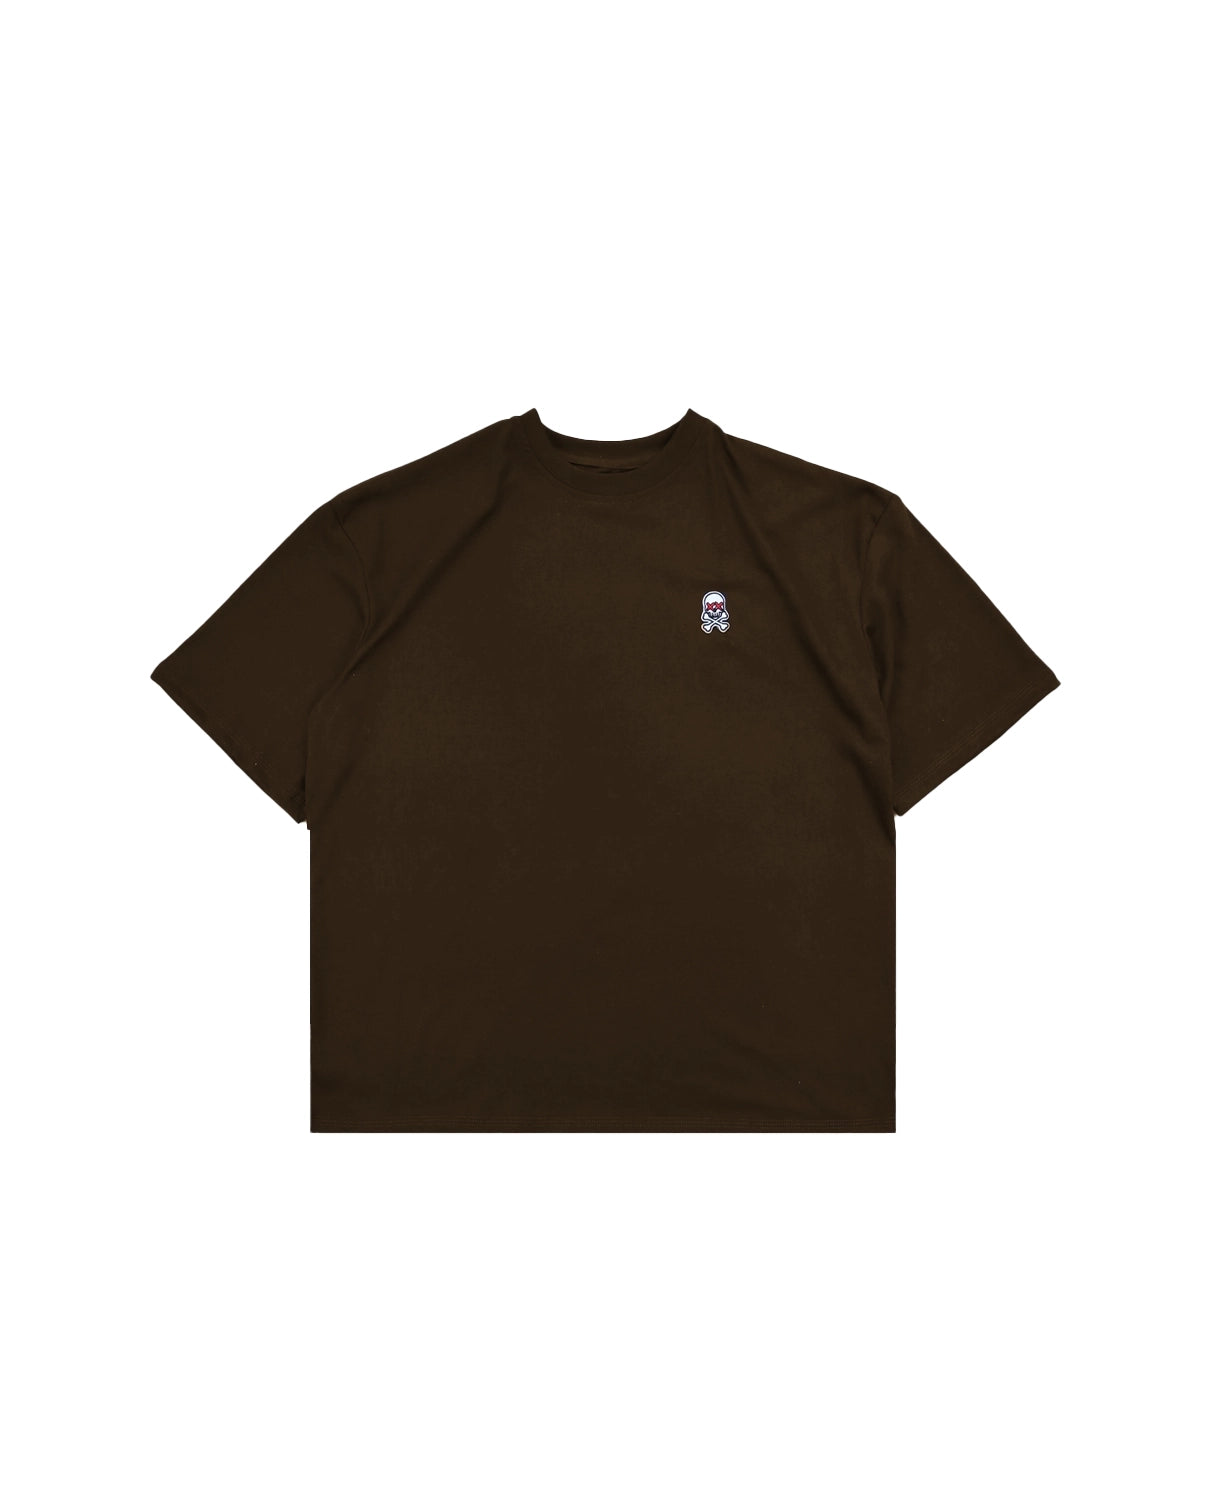 OVERSIZE PRO 2.0 BROWN